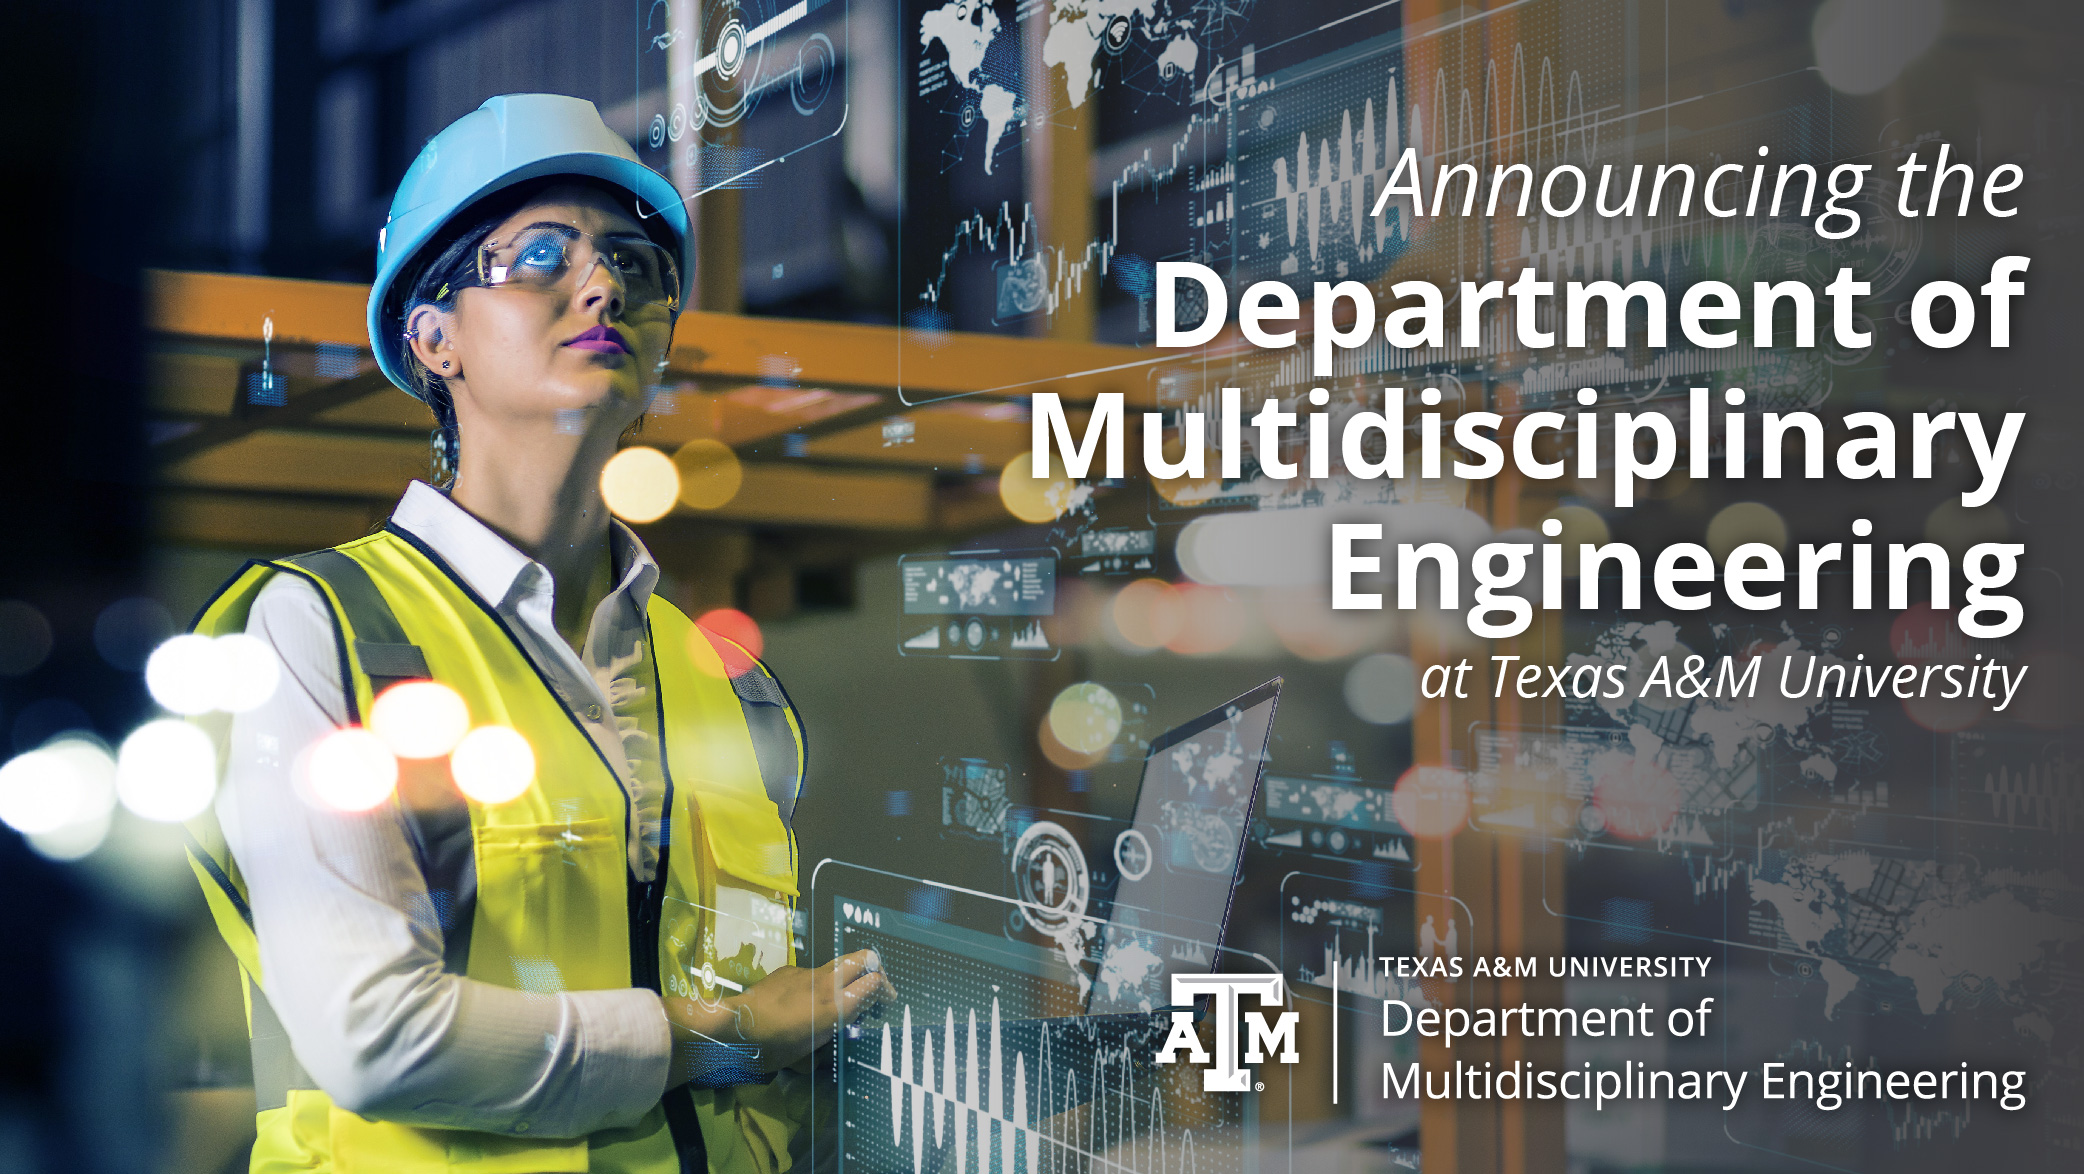 A woman is shown wearing a hard hat with abstract digital graphics overlaid. Words on the graphic say: Announcing the Department of Multidisciplinary Engineering.